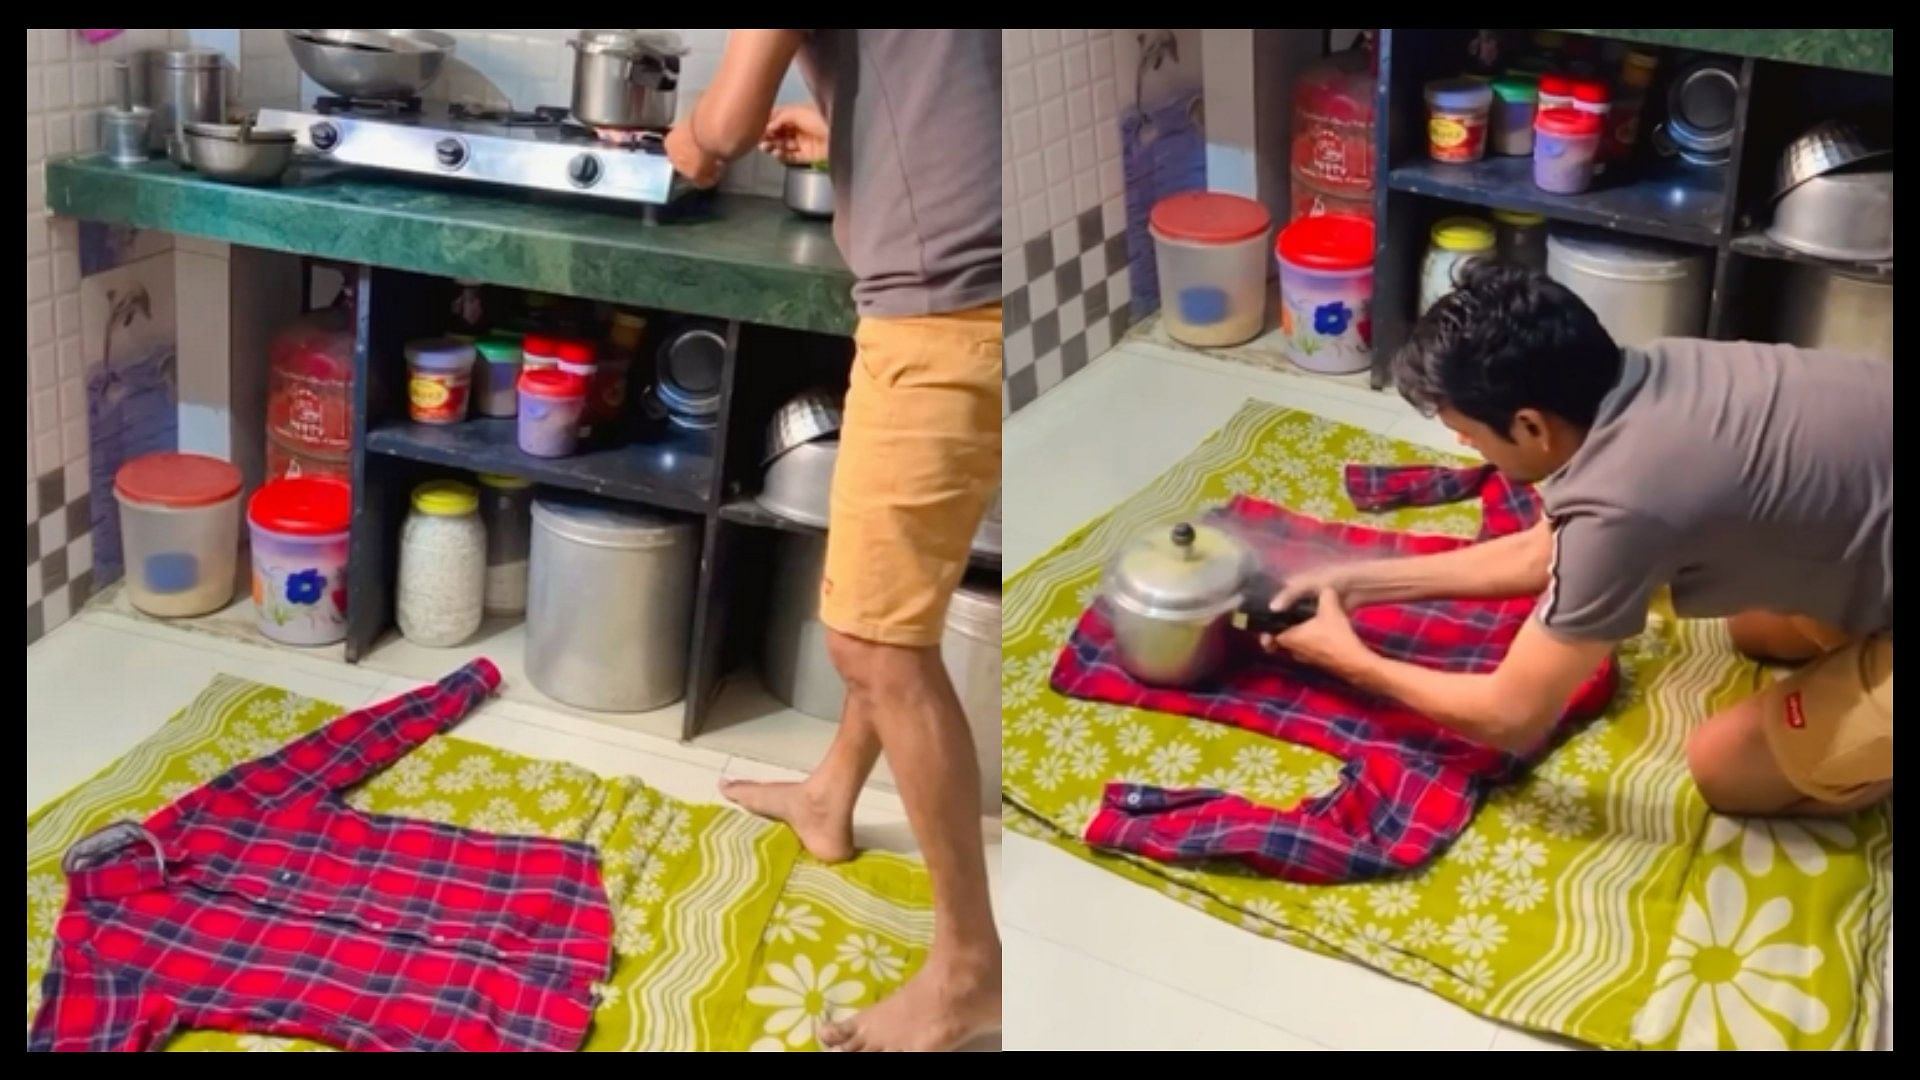 Without electricity ironing clothes ninja technique desi jugaad video viral on social media